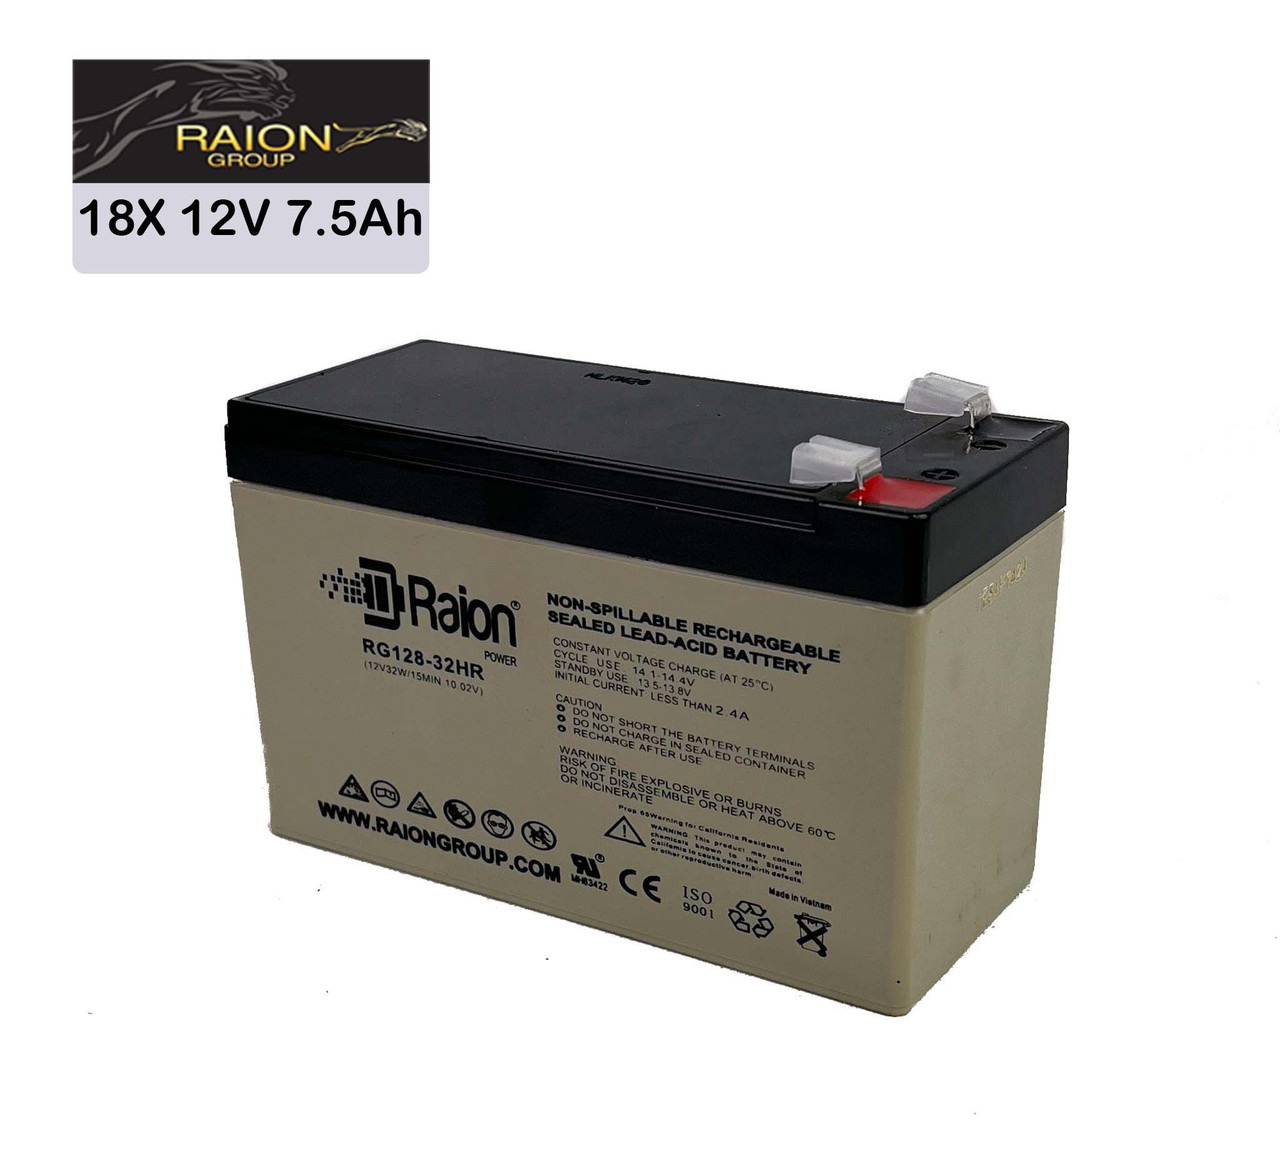 Raion Power 12V 7.5Ah High Rate Discharge UPS Batteries for Minuteman MCP BP2000 - 18 Pack